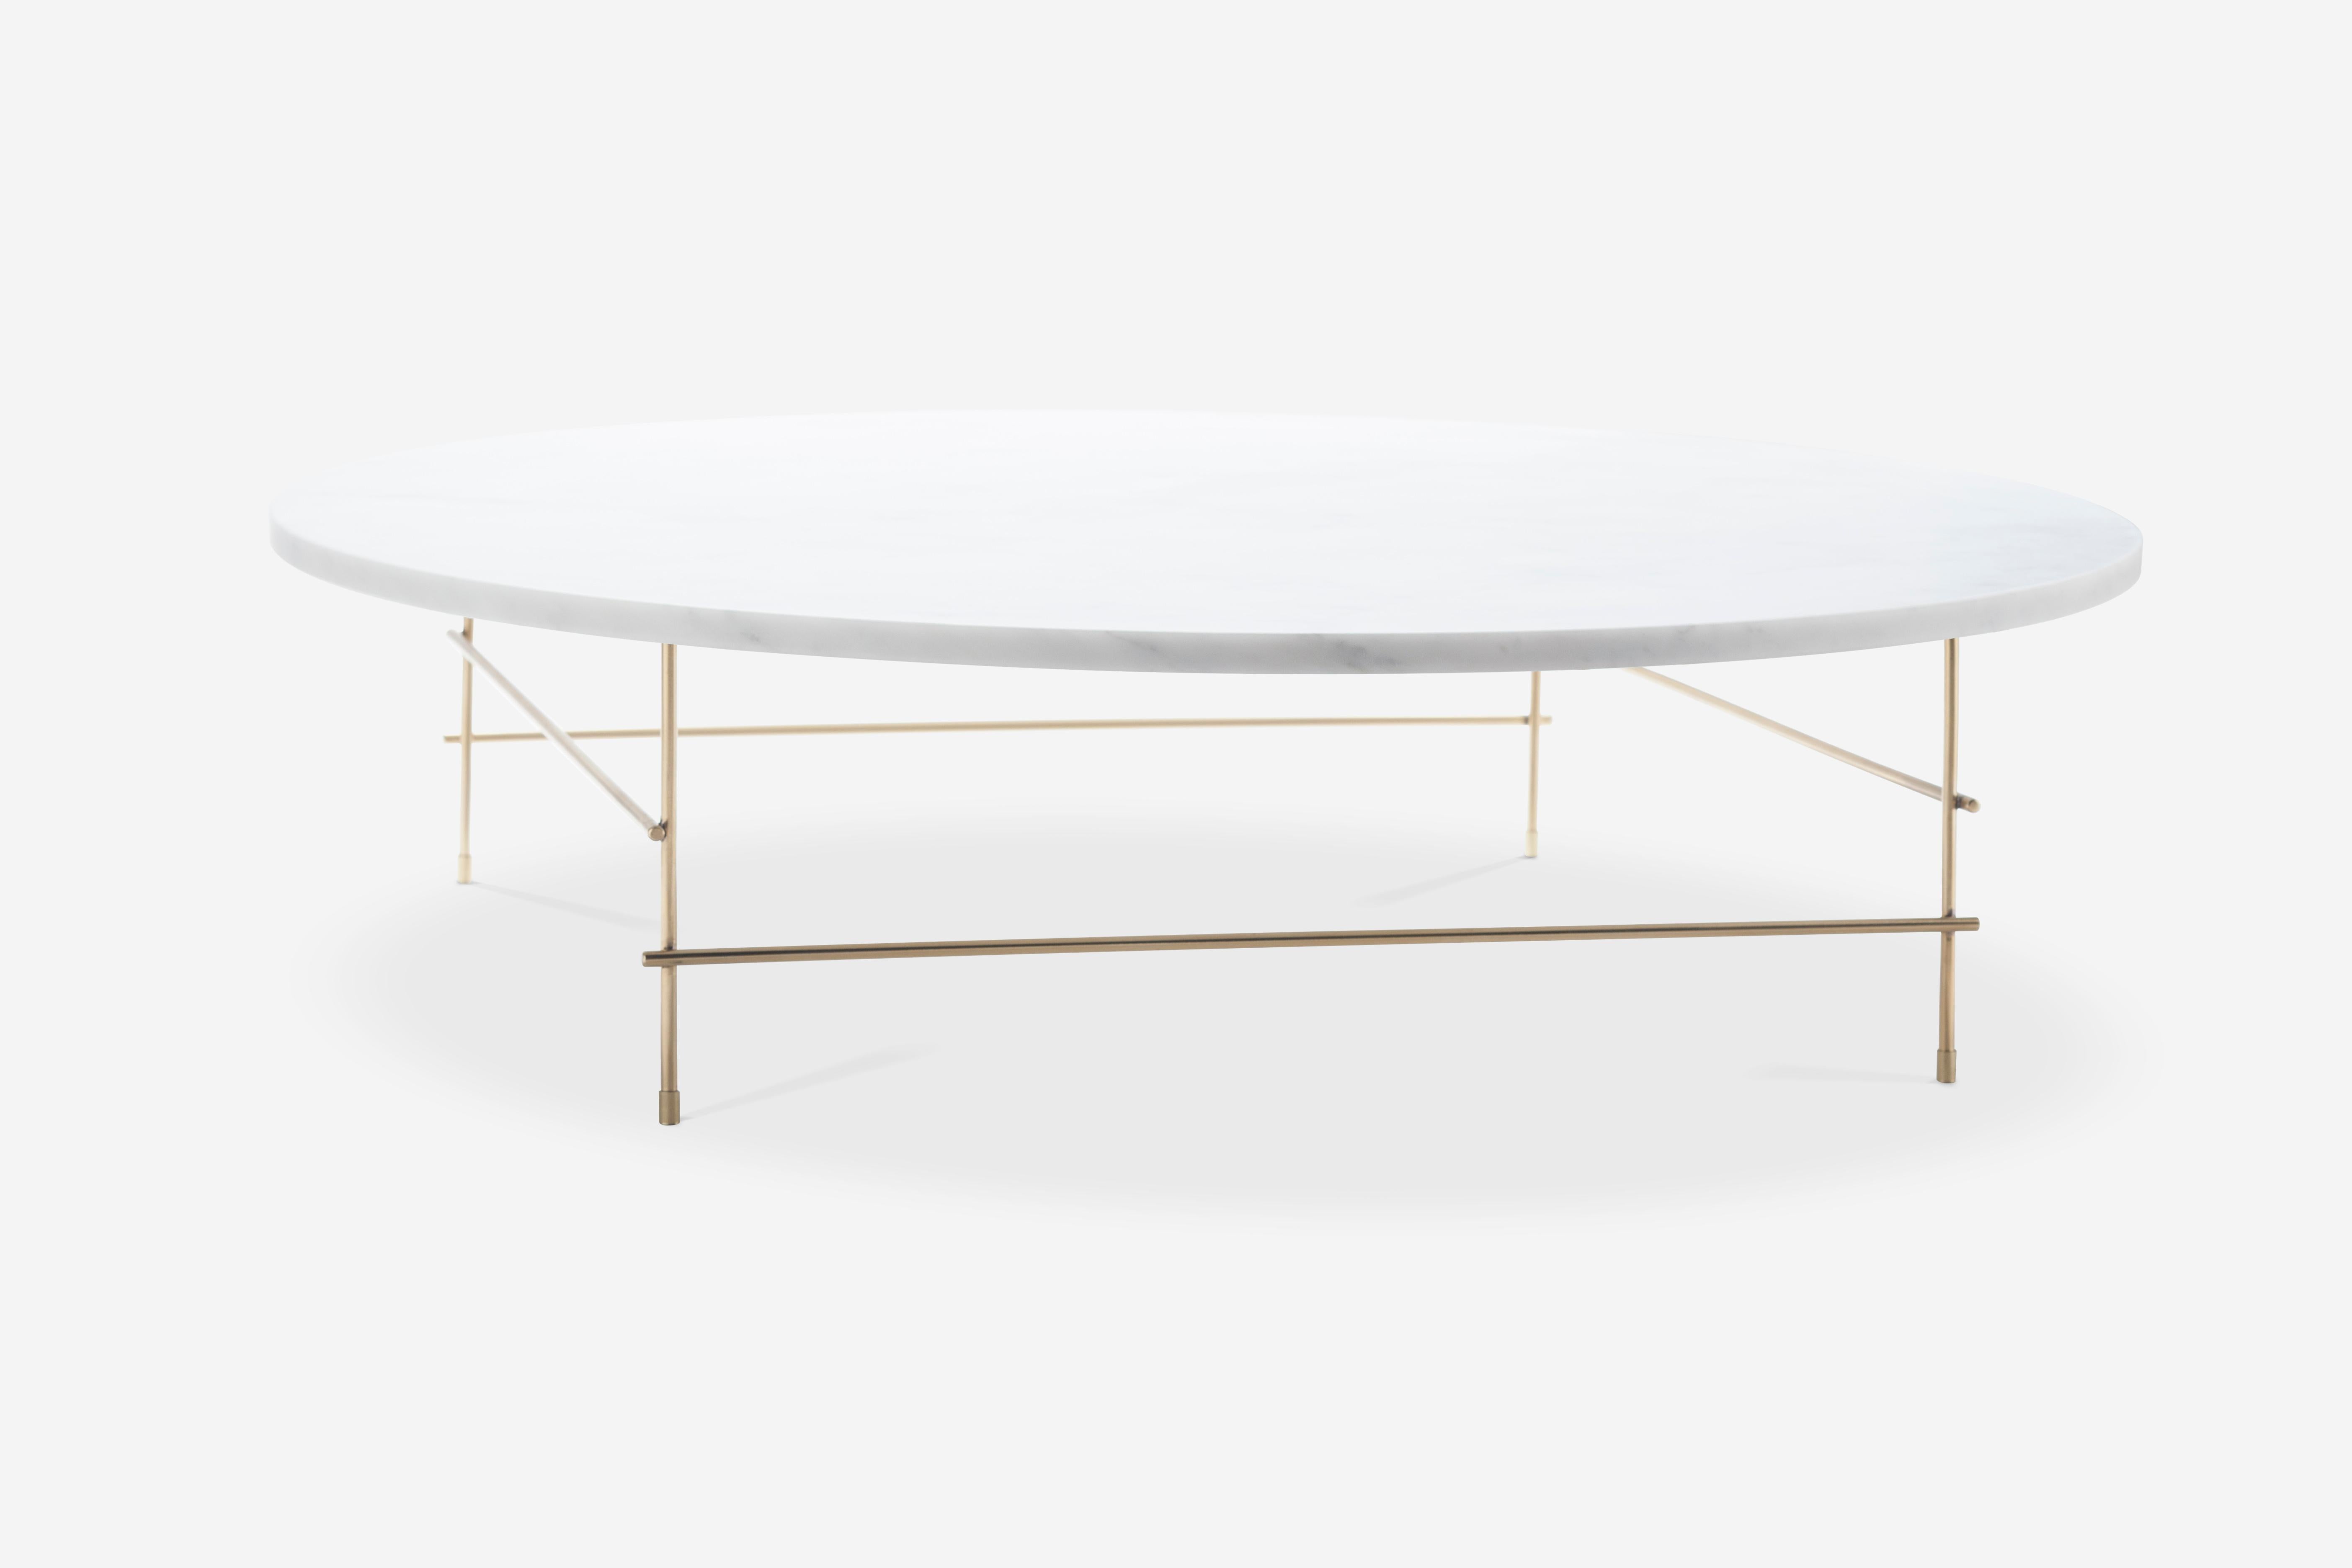 Marble coffee table by Joseph Vila Capdevila
Material: Carrara marble, brass
Dimensions: ø 100 x 25.5 cm
Weight: 46.5 kg


Aparentment is a space for creation and innovation, experimenting with materials with the goal to develop robust, lasting and